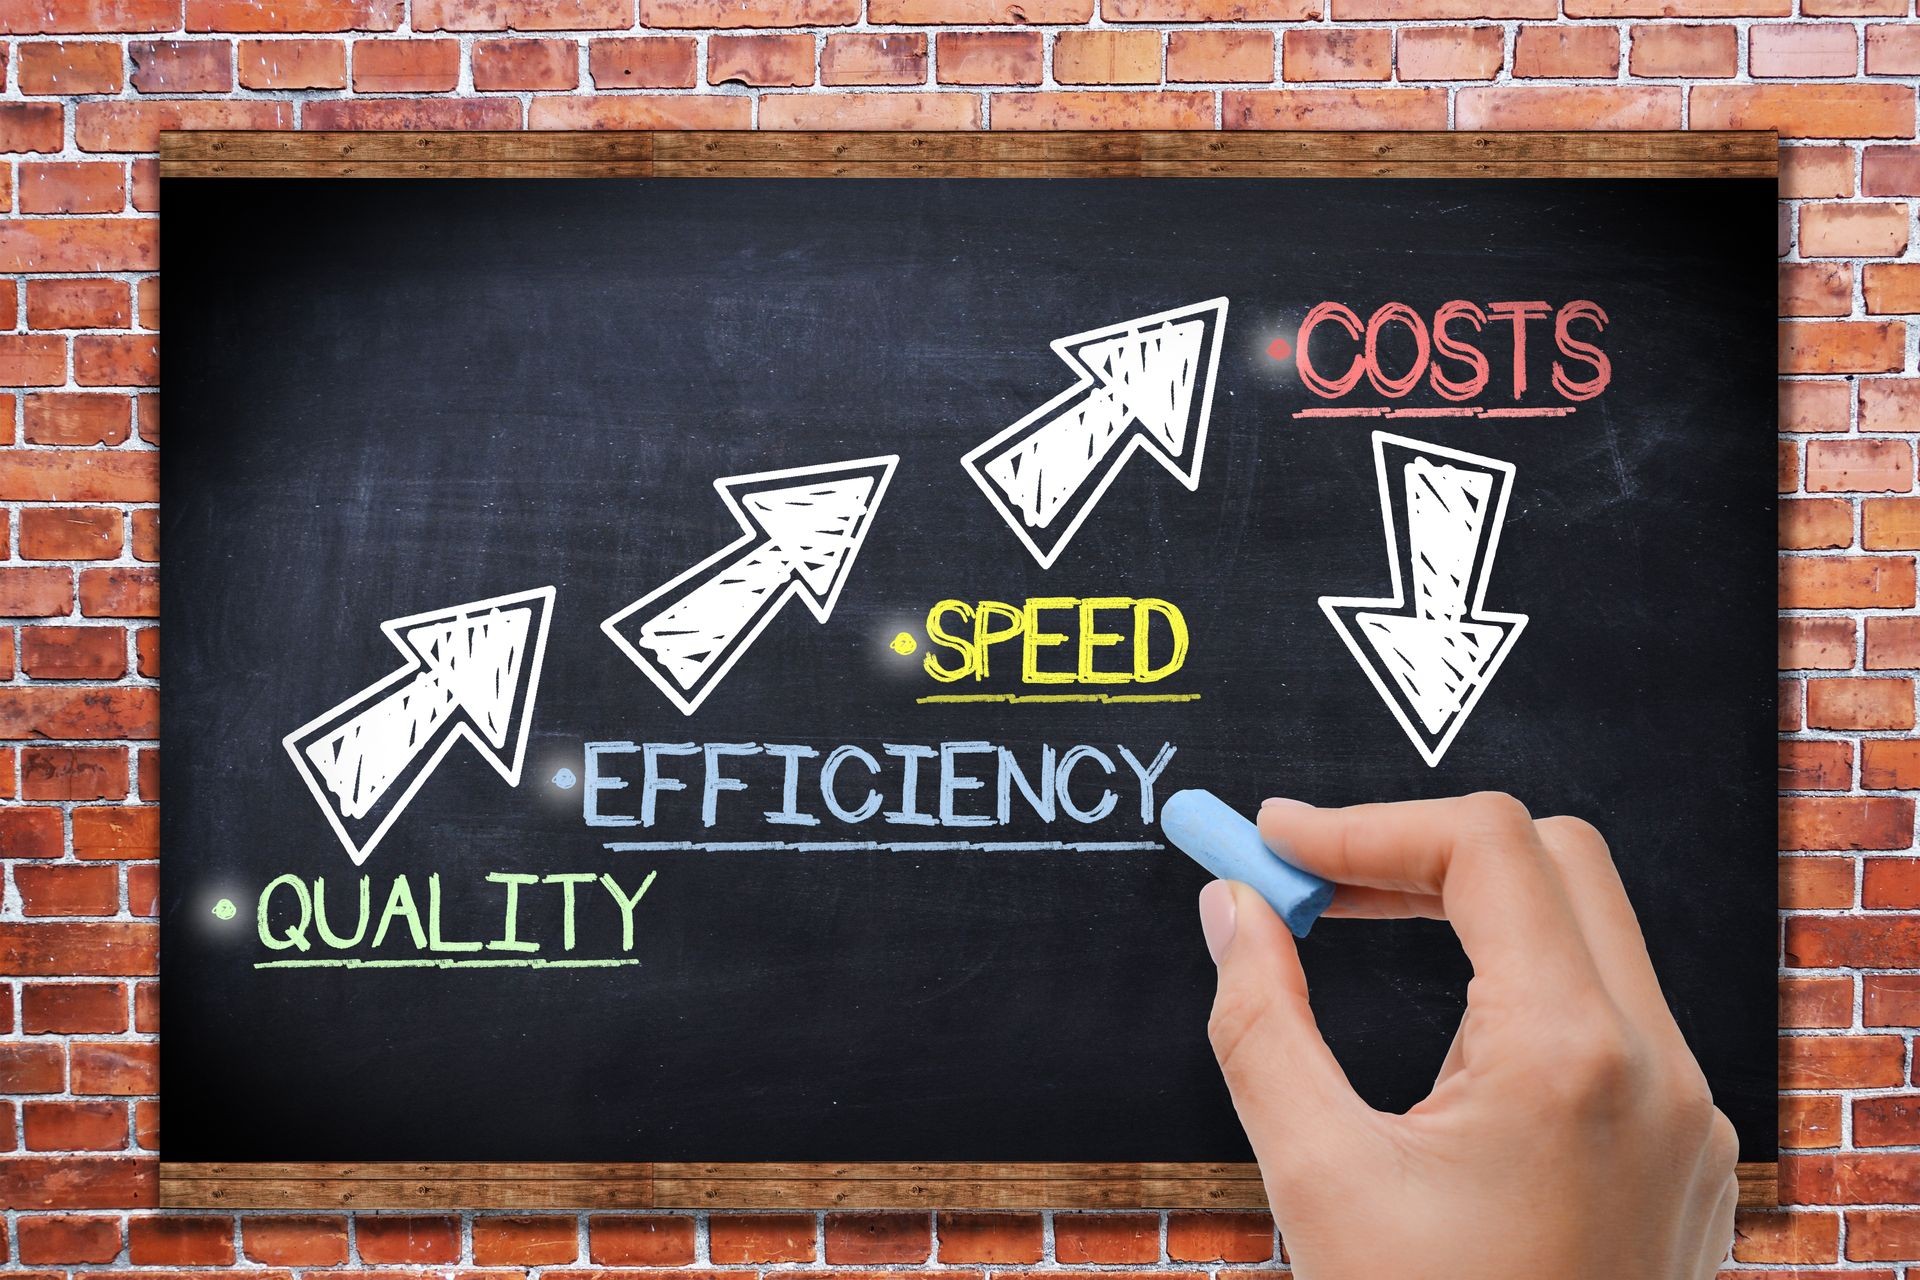 Boost business performance by increase quality, efficiency and speed and save costs 

